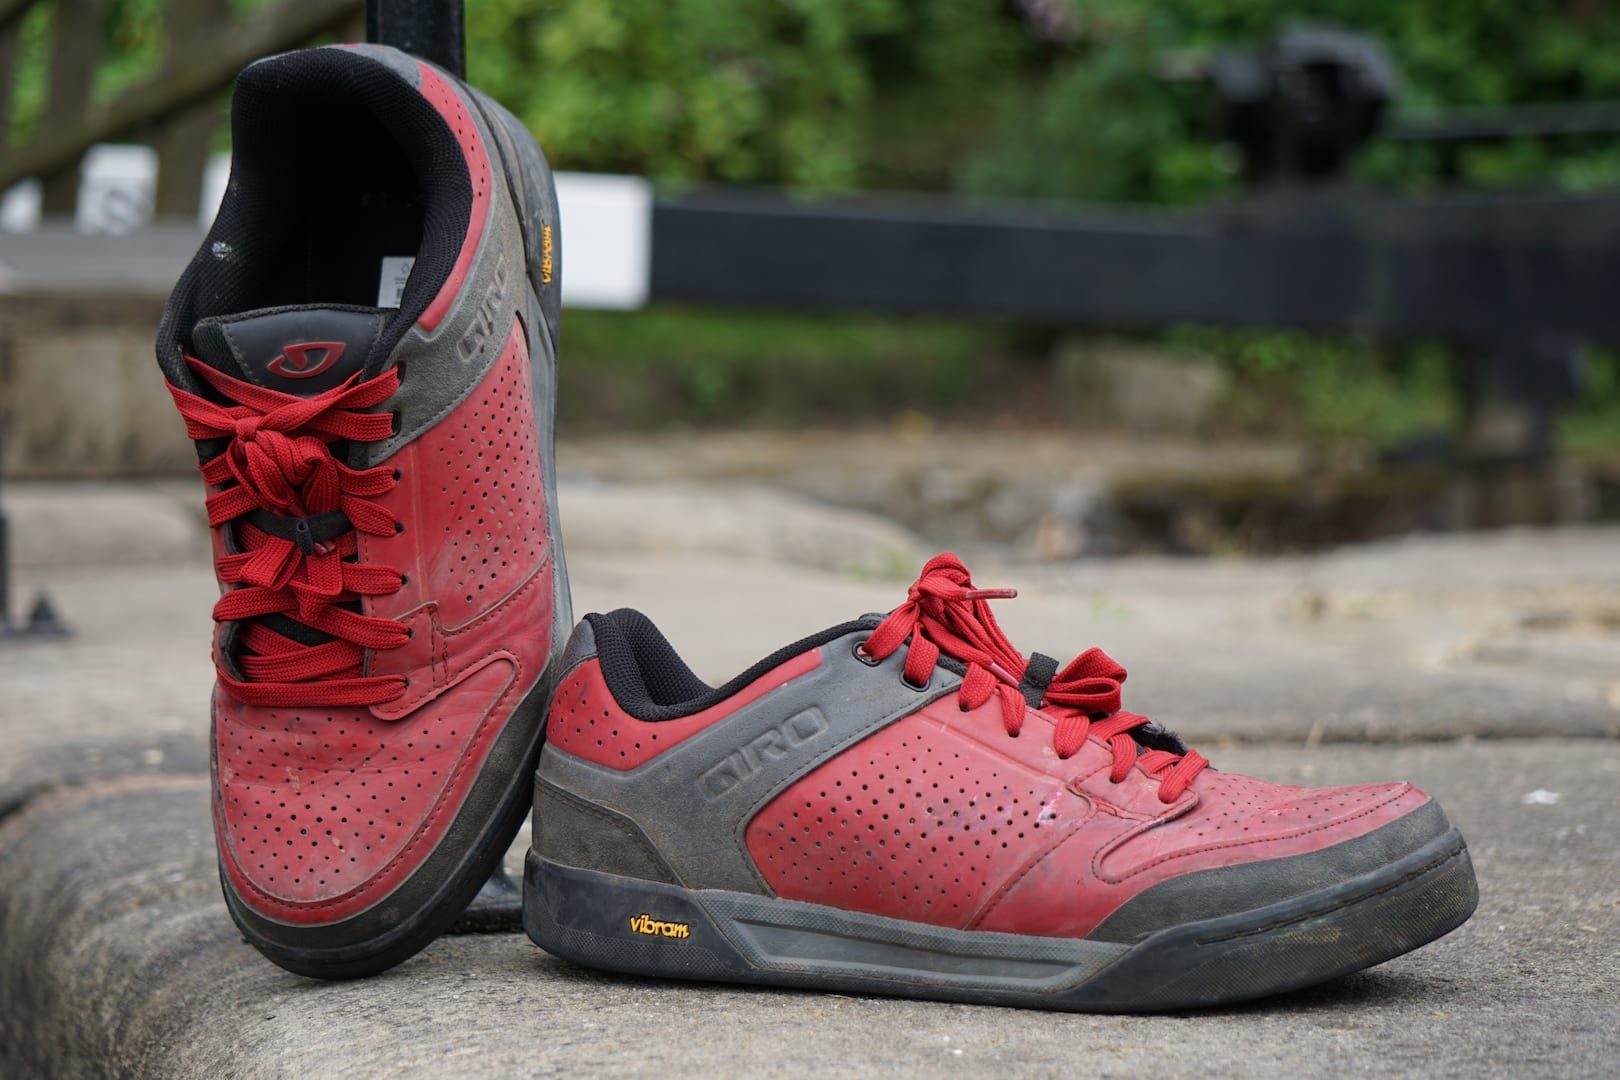 Review: The Giro Riddance flat pedal shoe uses a Vibram Megagrip sole for # ...1620 x 1080